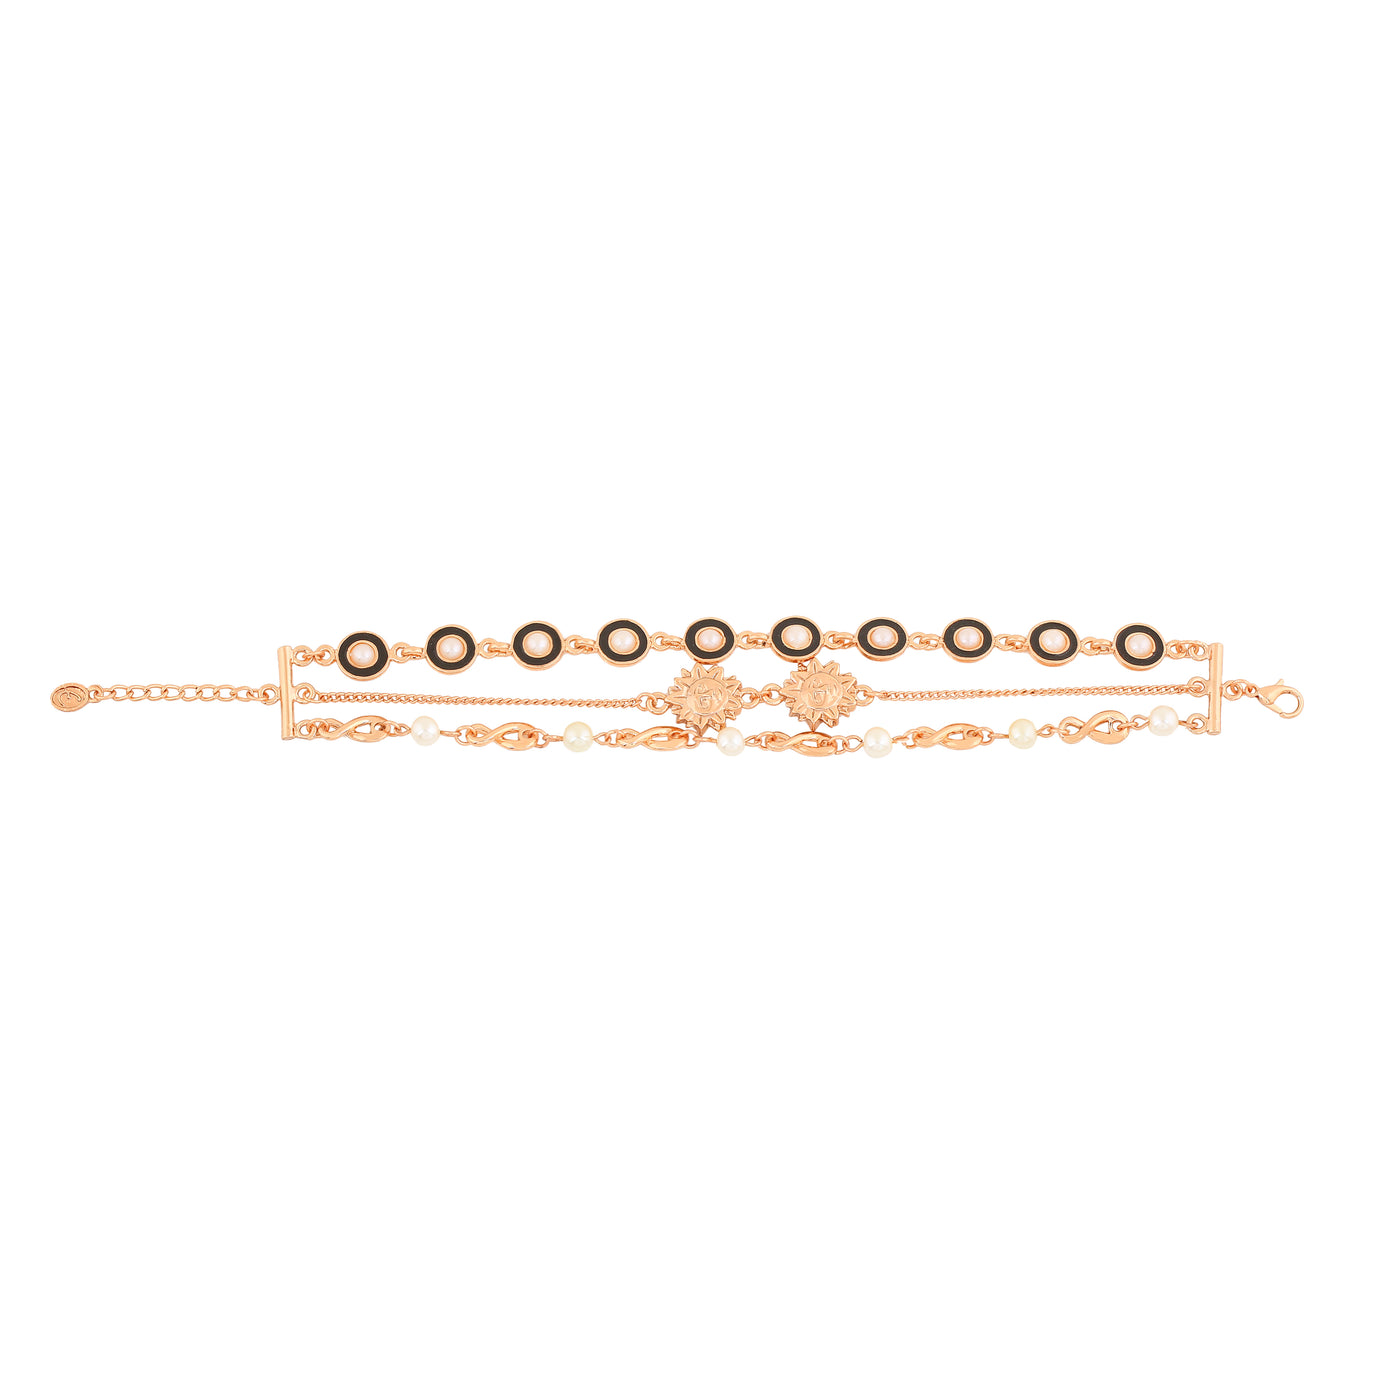 Estele Rose Gold Plated Striking Bracelet with Pearls for Women